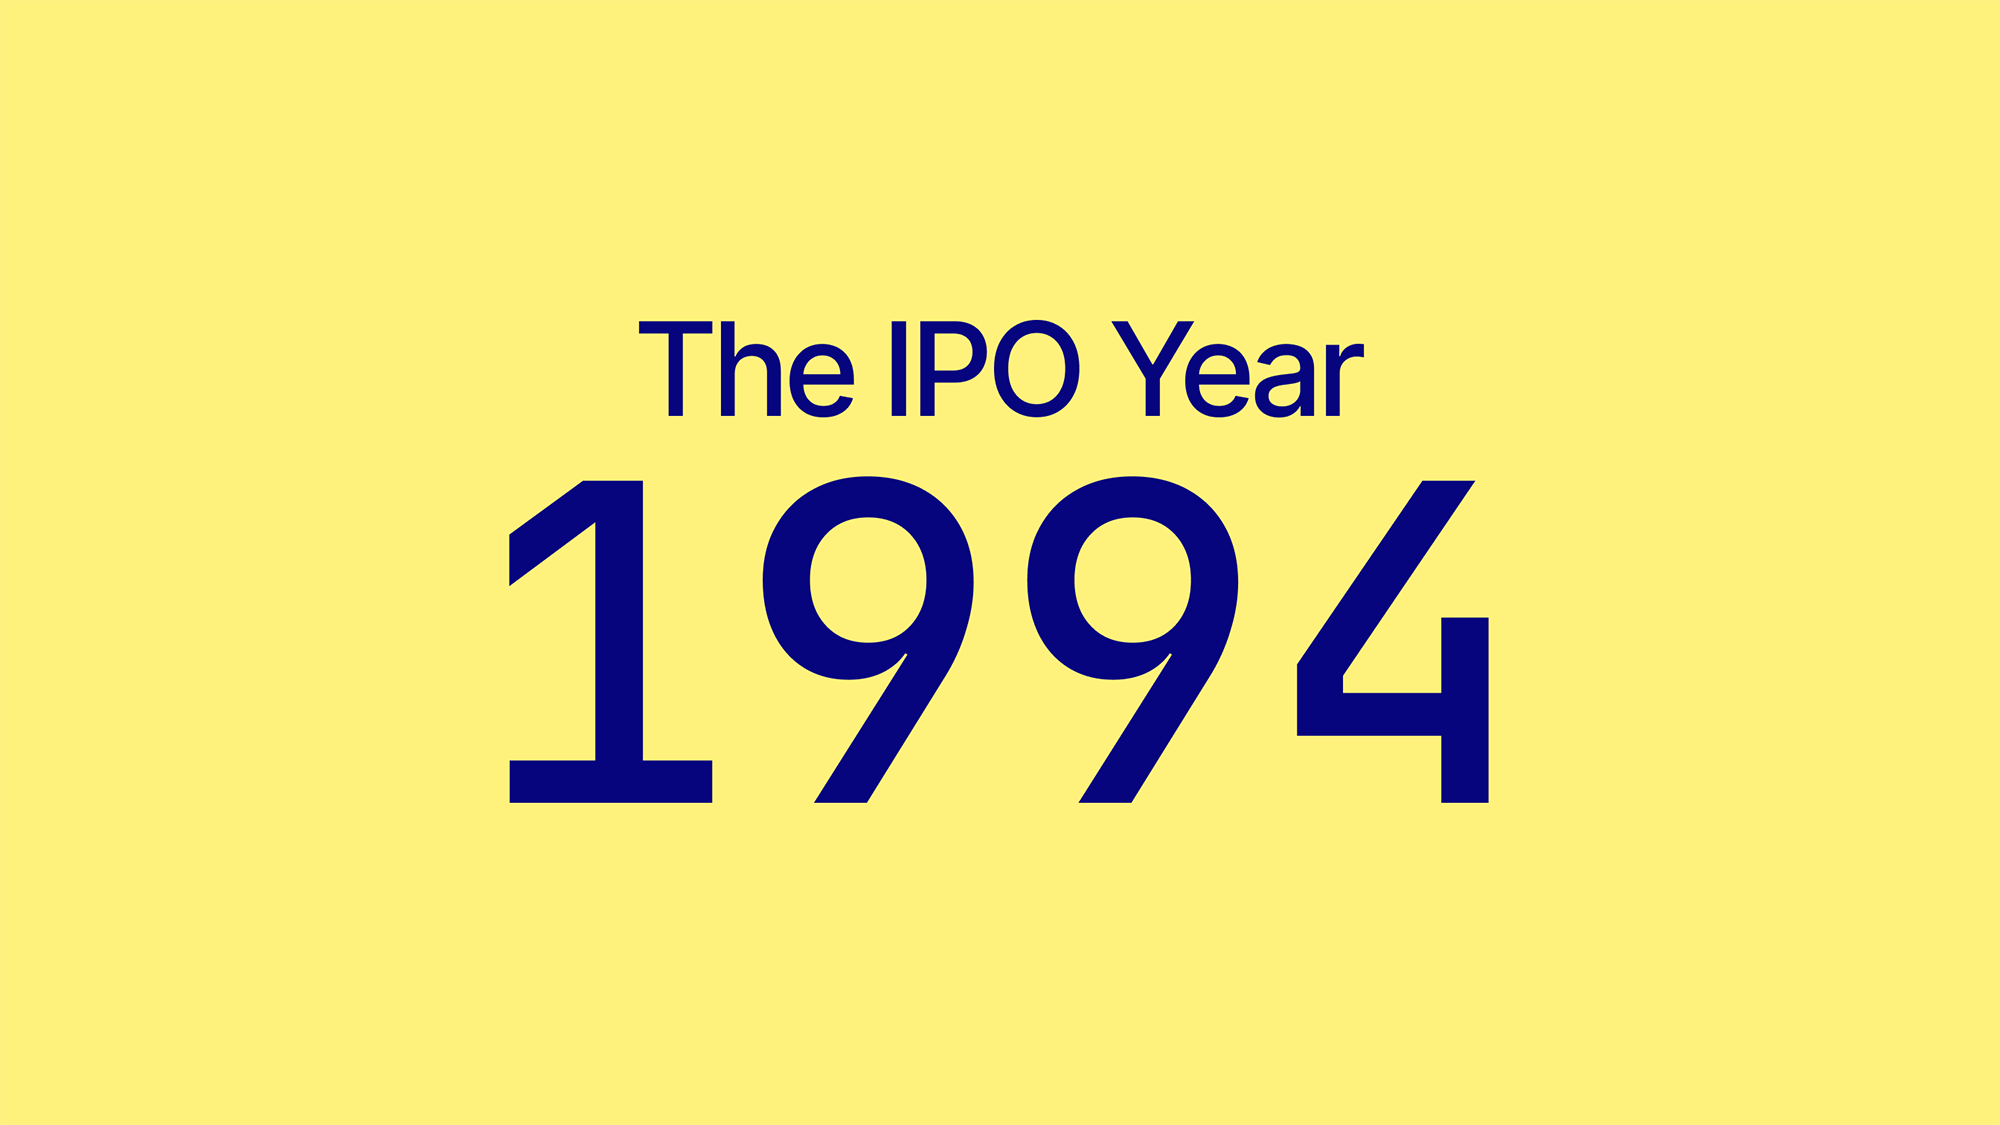 The IPO Year 1994